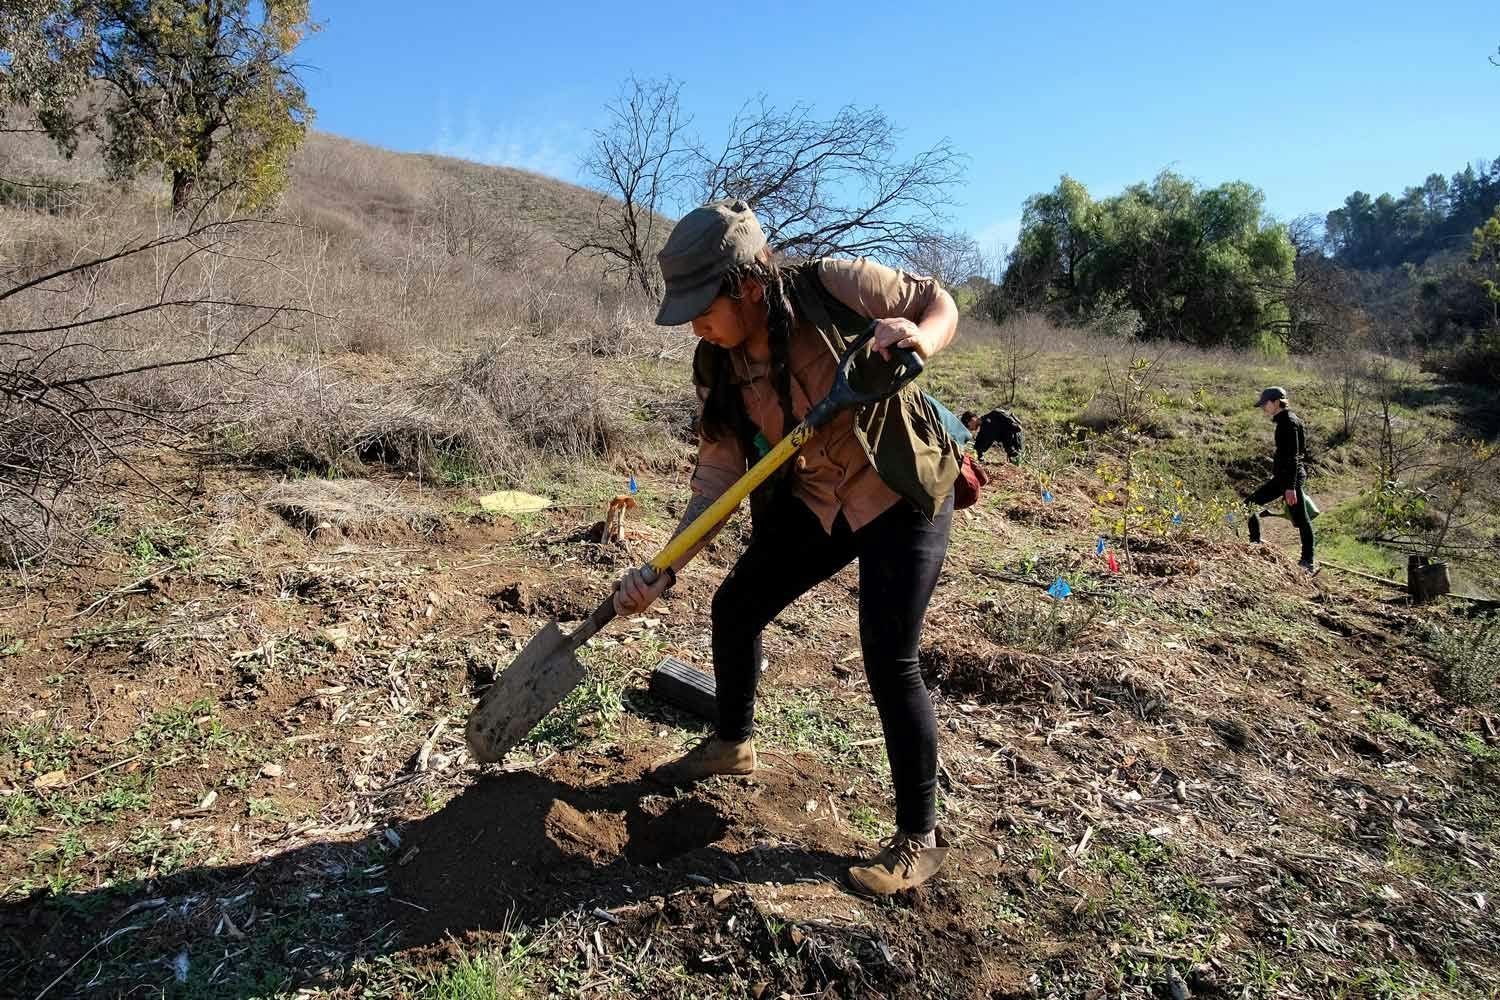 A young woman wearing a cap, vest, and black pants uses a shovel to dig soil on a grassy hillside in Los Angeles.